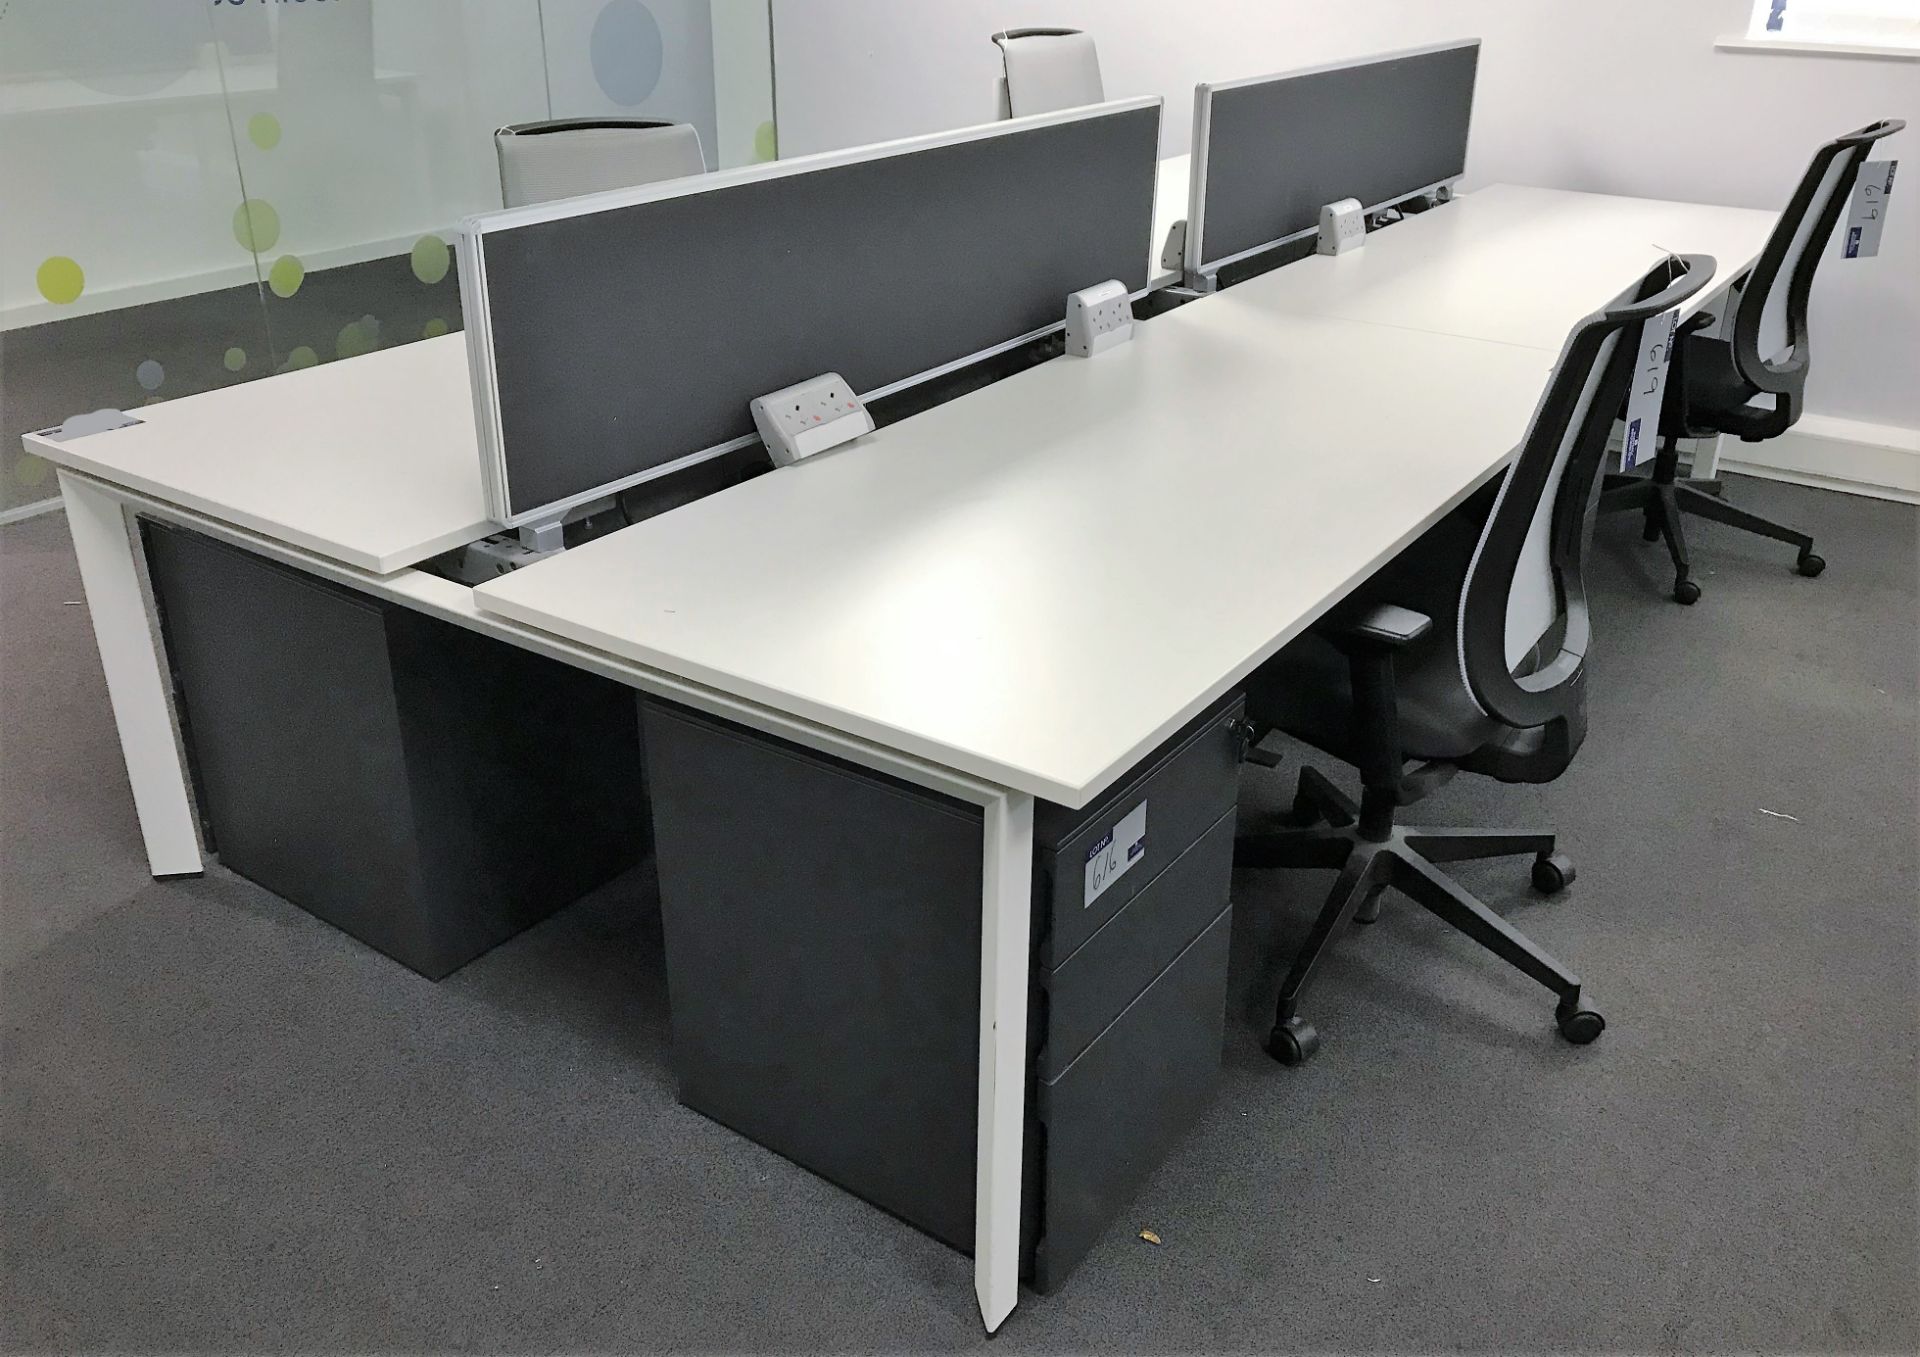 A Steelcase Model WP3G12801 4 position Modular Workstation with 2 Dividers, Integral Cable Trays,